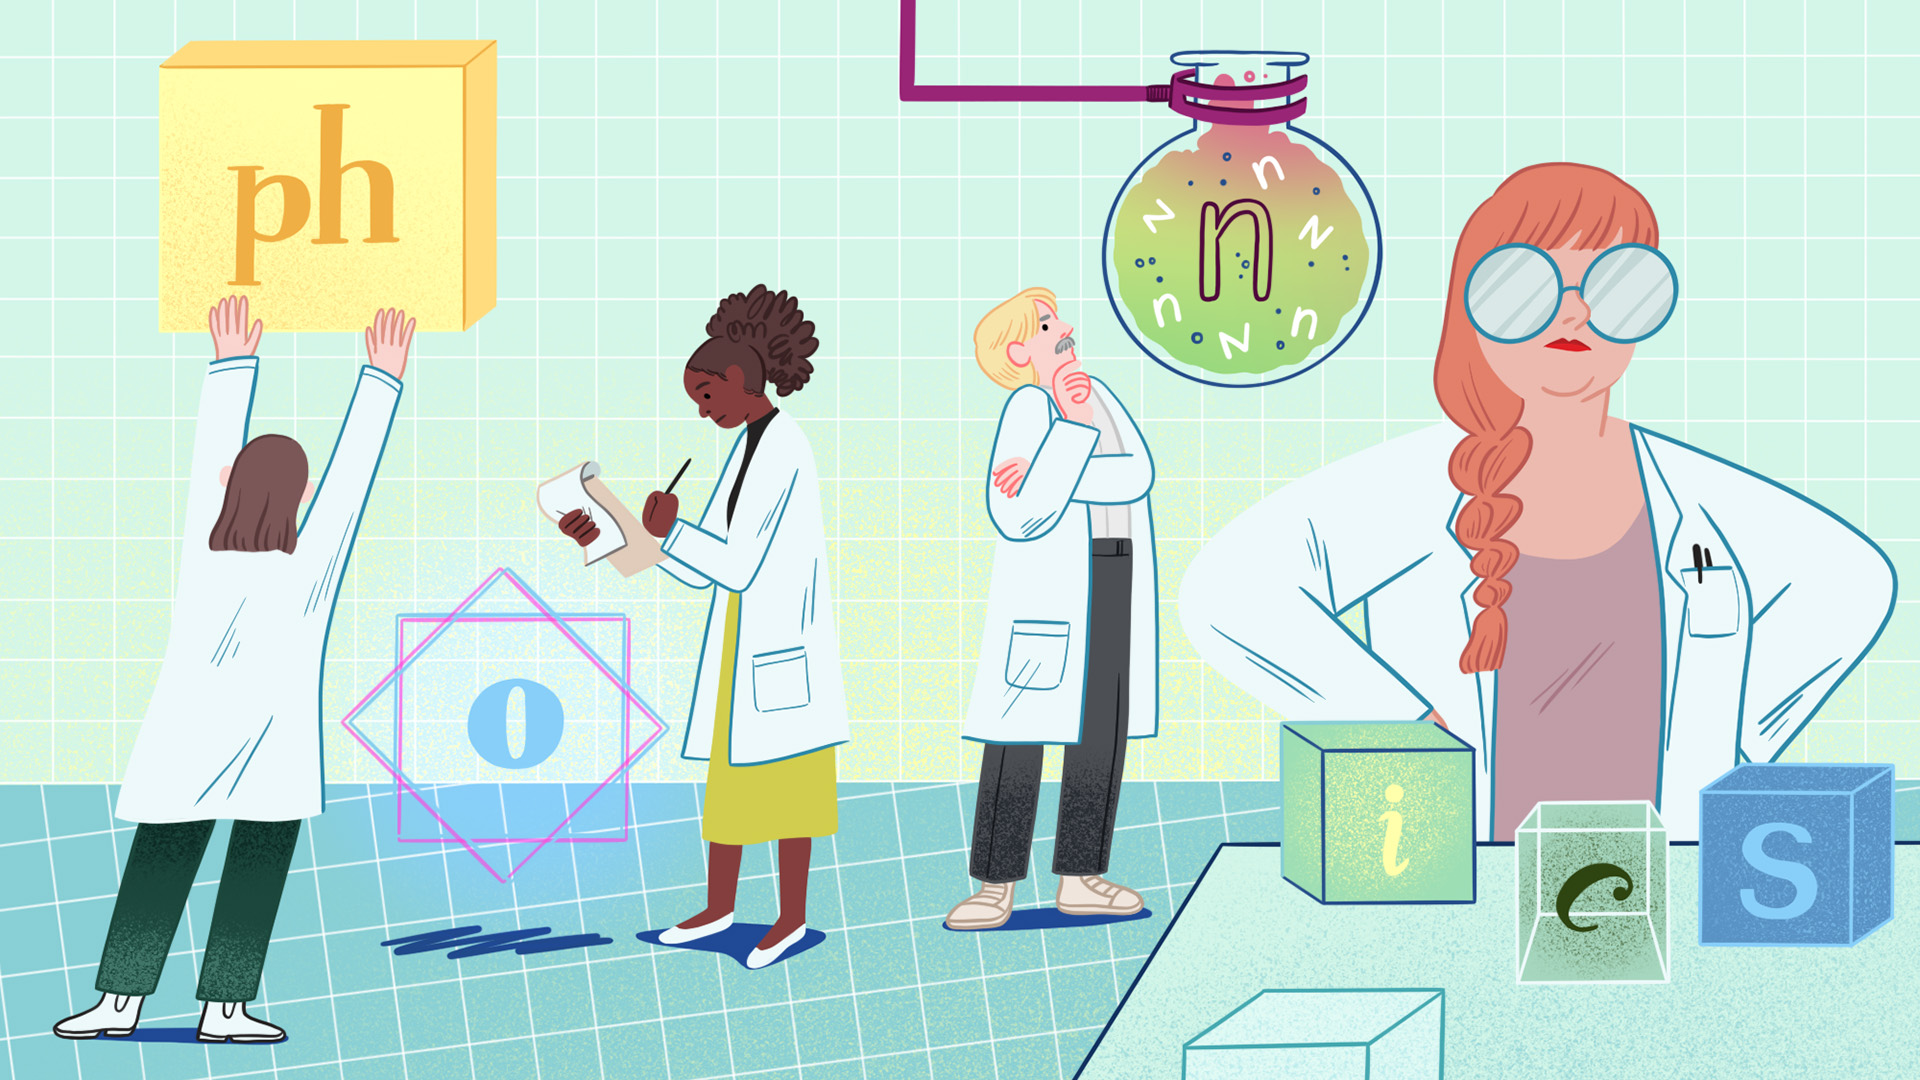 Four scientists in lab coats are observing various shapes and beakers, taking notes, and running tests. The shapes have letters on them, which collectively spell out the word “phonics.”